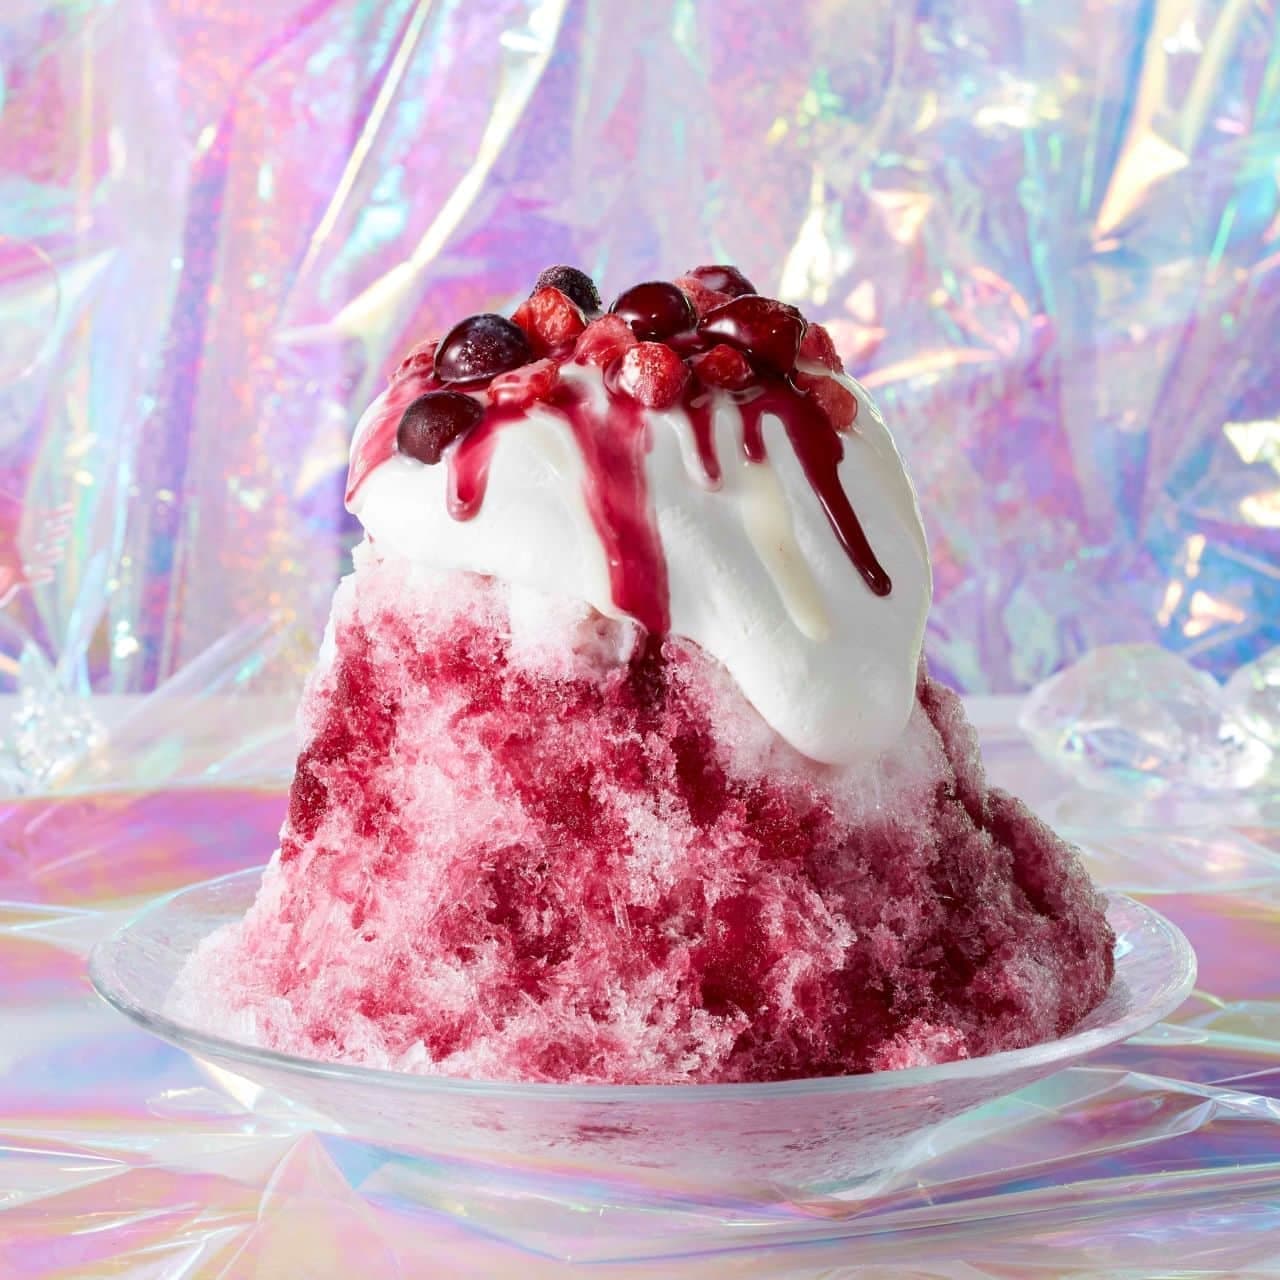 Coco's "Fluffy shaved ice of grapes and berries"